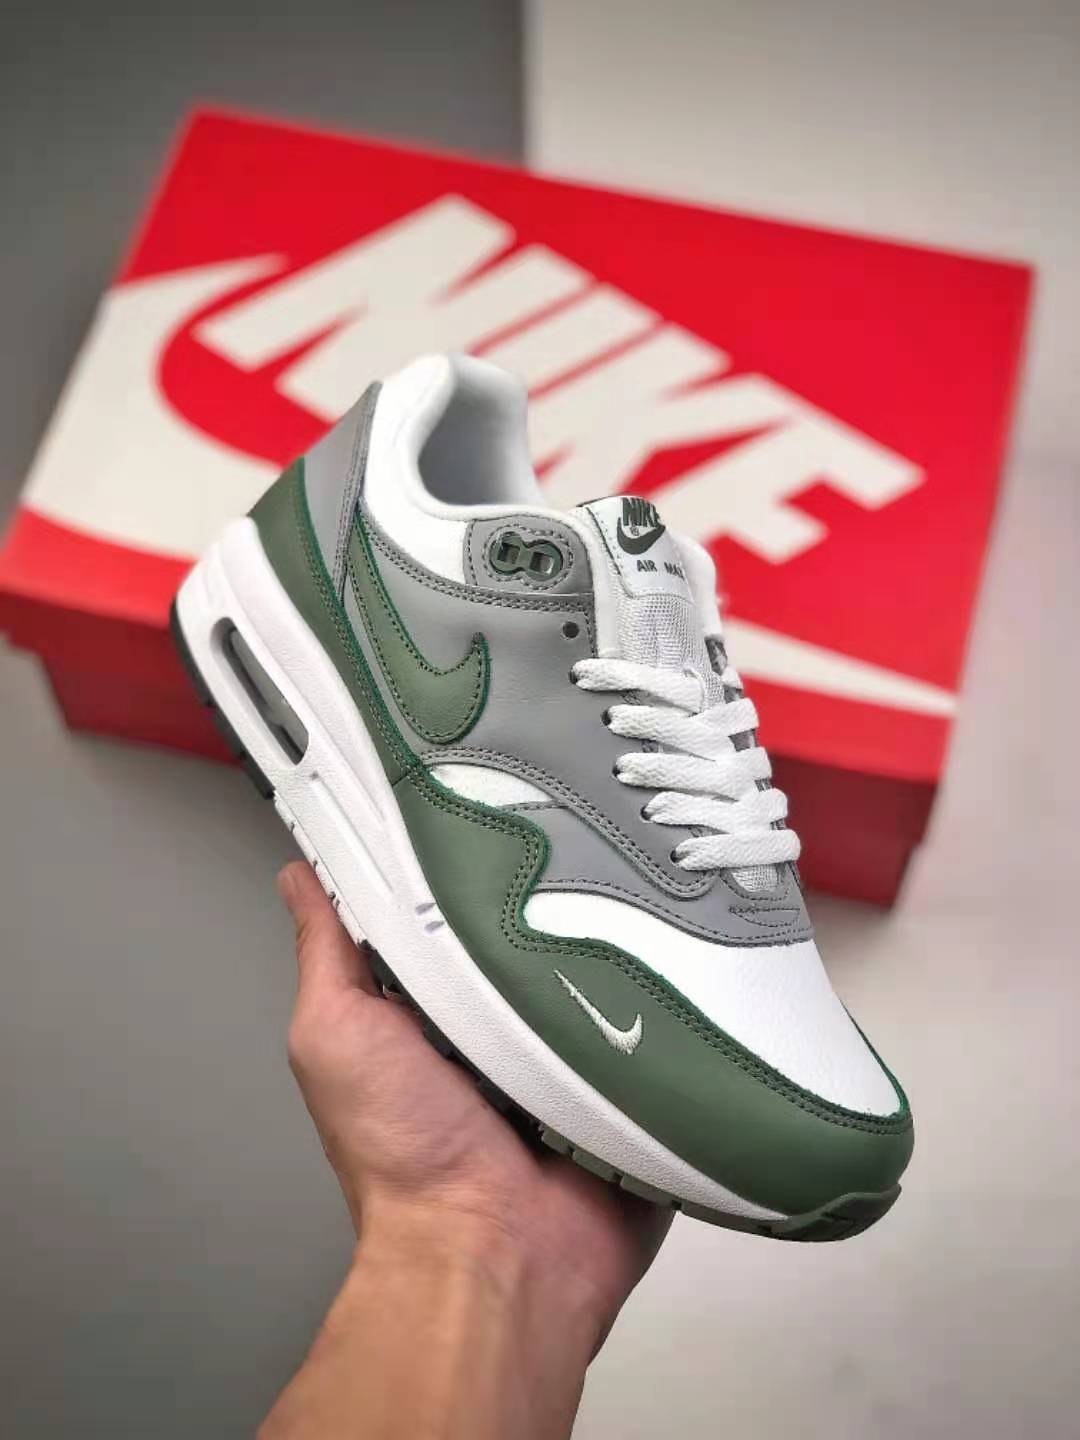 Nike Air Max 1 Premium 'Spiral Sage' DB5074-100 - Stylish and Comfortable Sneakers for Men and Women